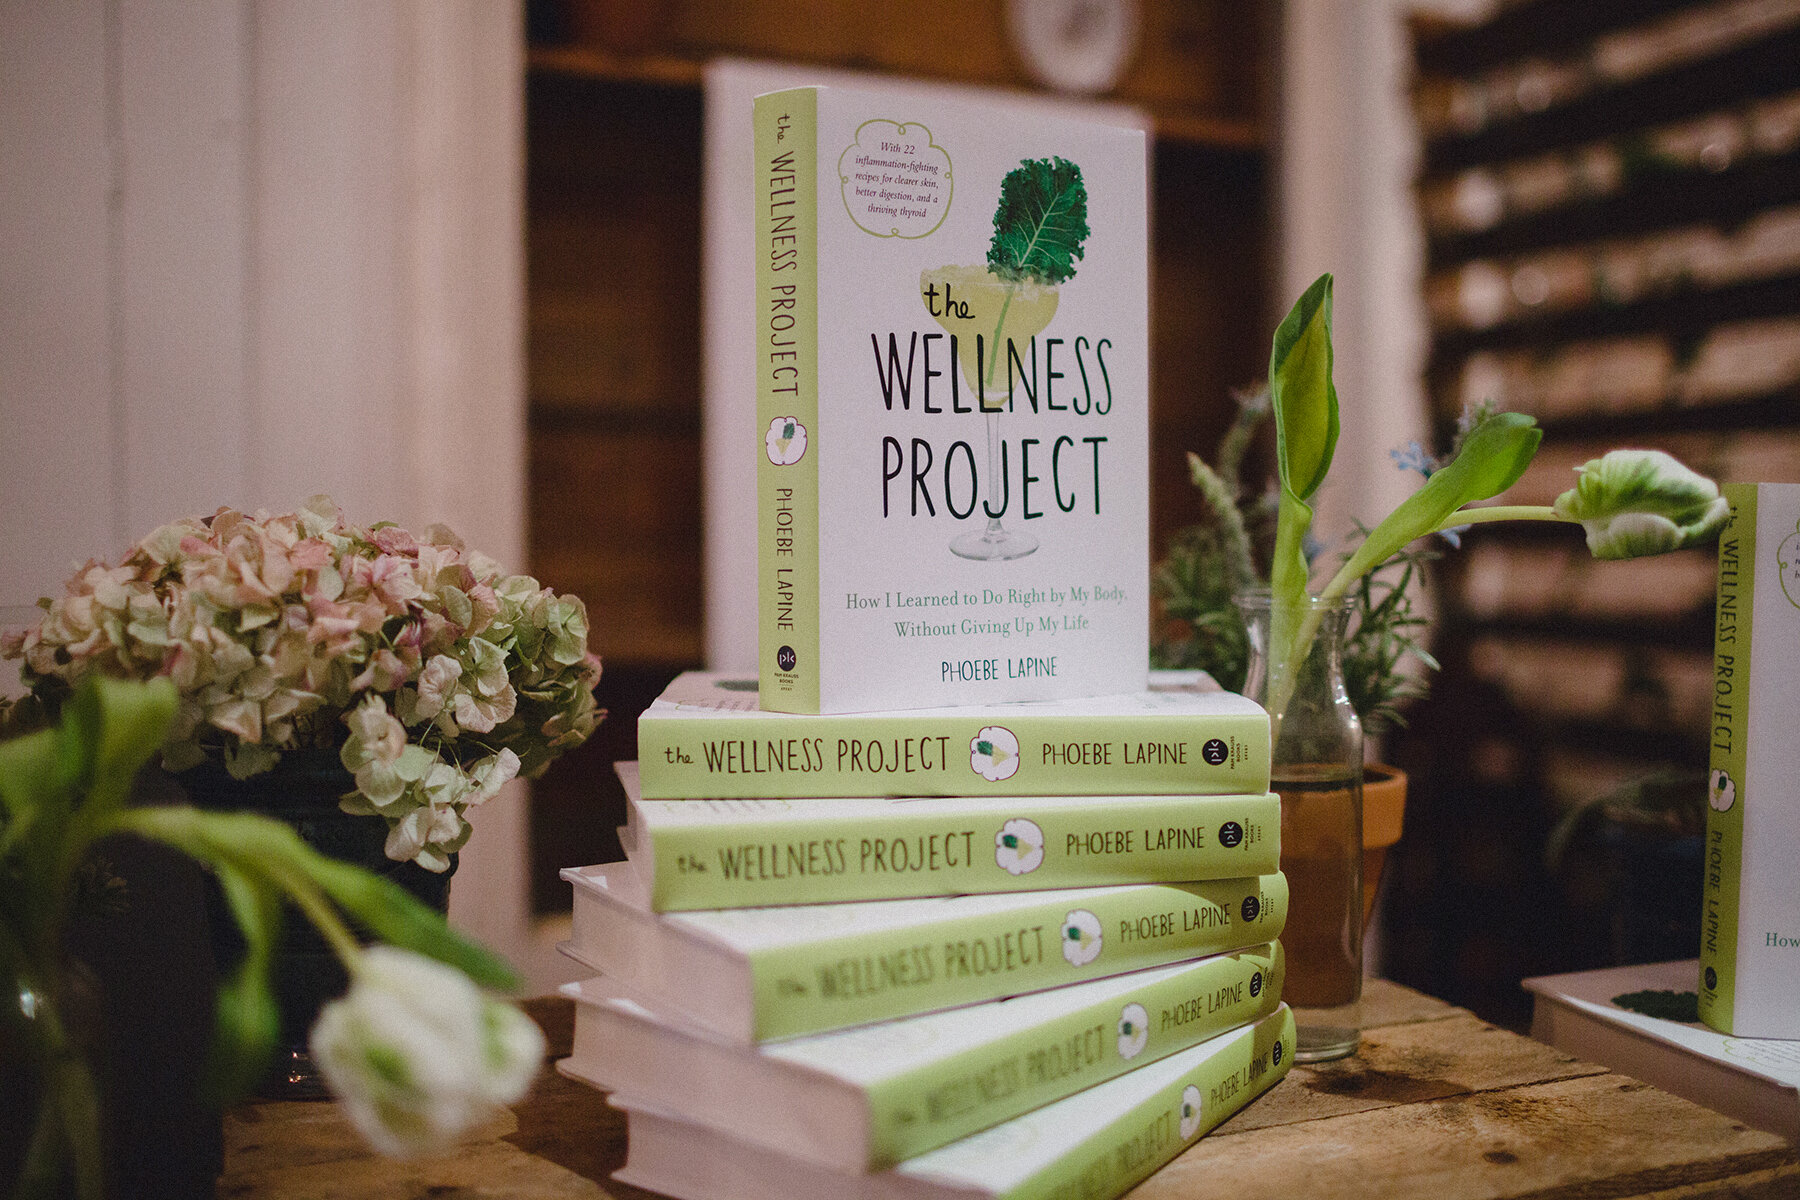  " The Wellness Project " by Phoebe Lapine Book Launch Maman NYC, New York, 2017 